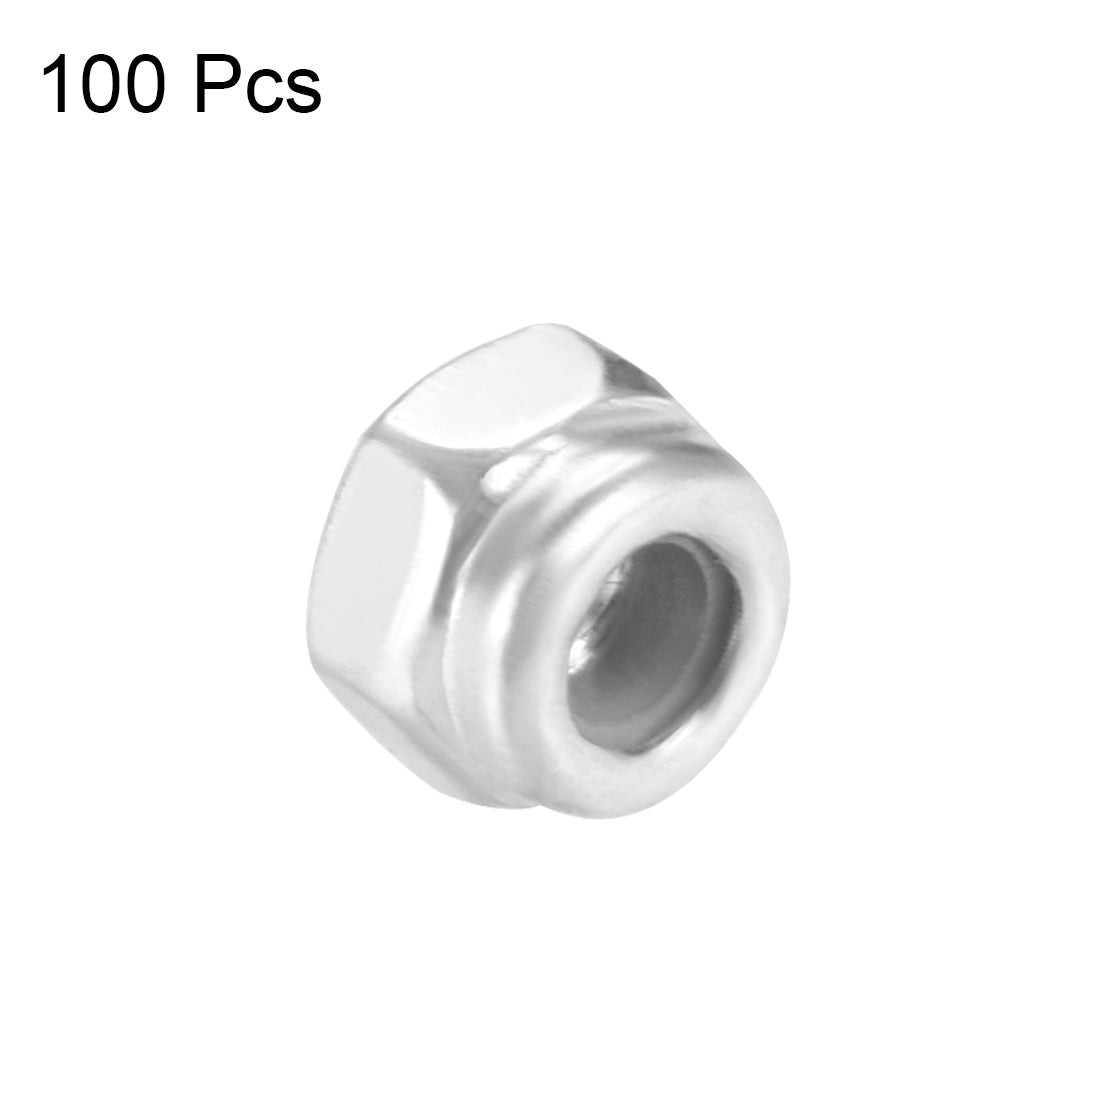 uxcell Uxcell M2.5 x 0.45mm Nylon Insert Hex Lock Nuts, Carbon Steel White Zinc Plated, 100 Pcs